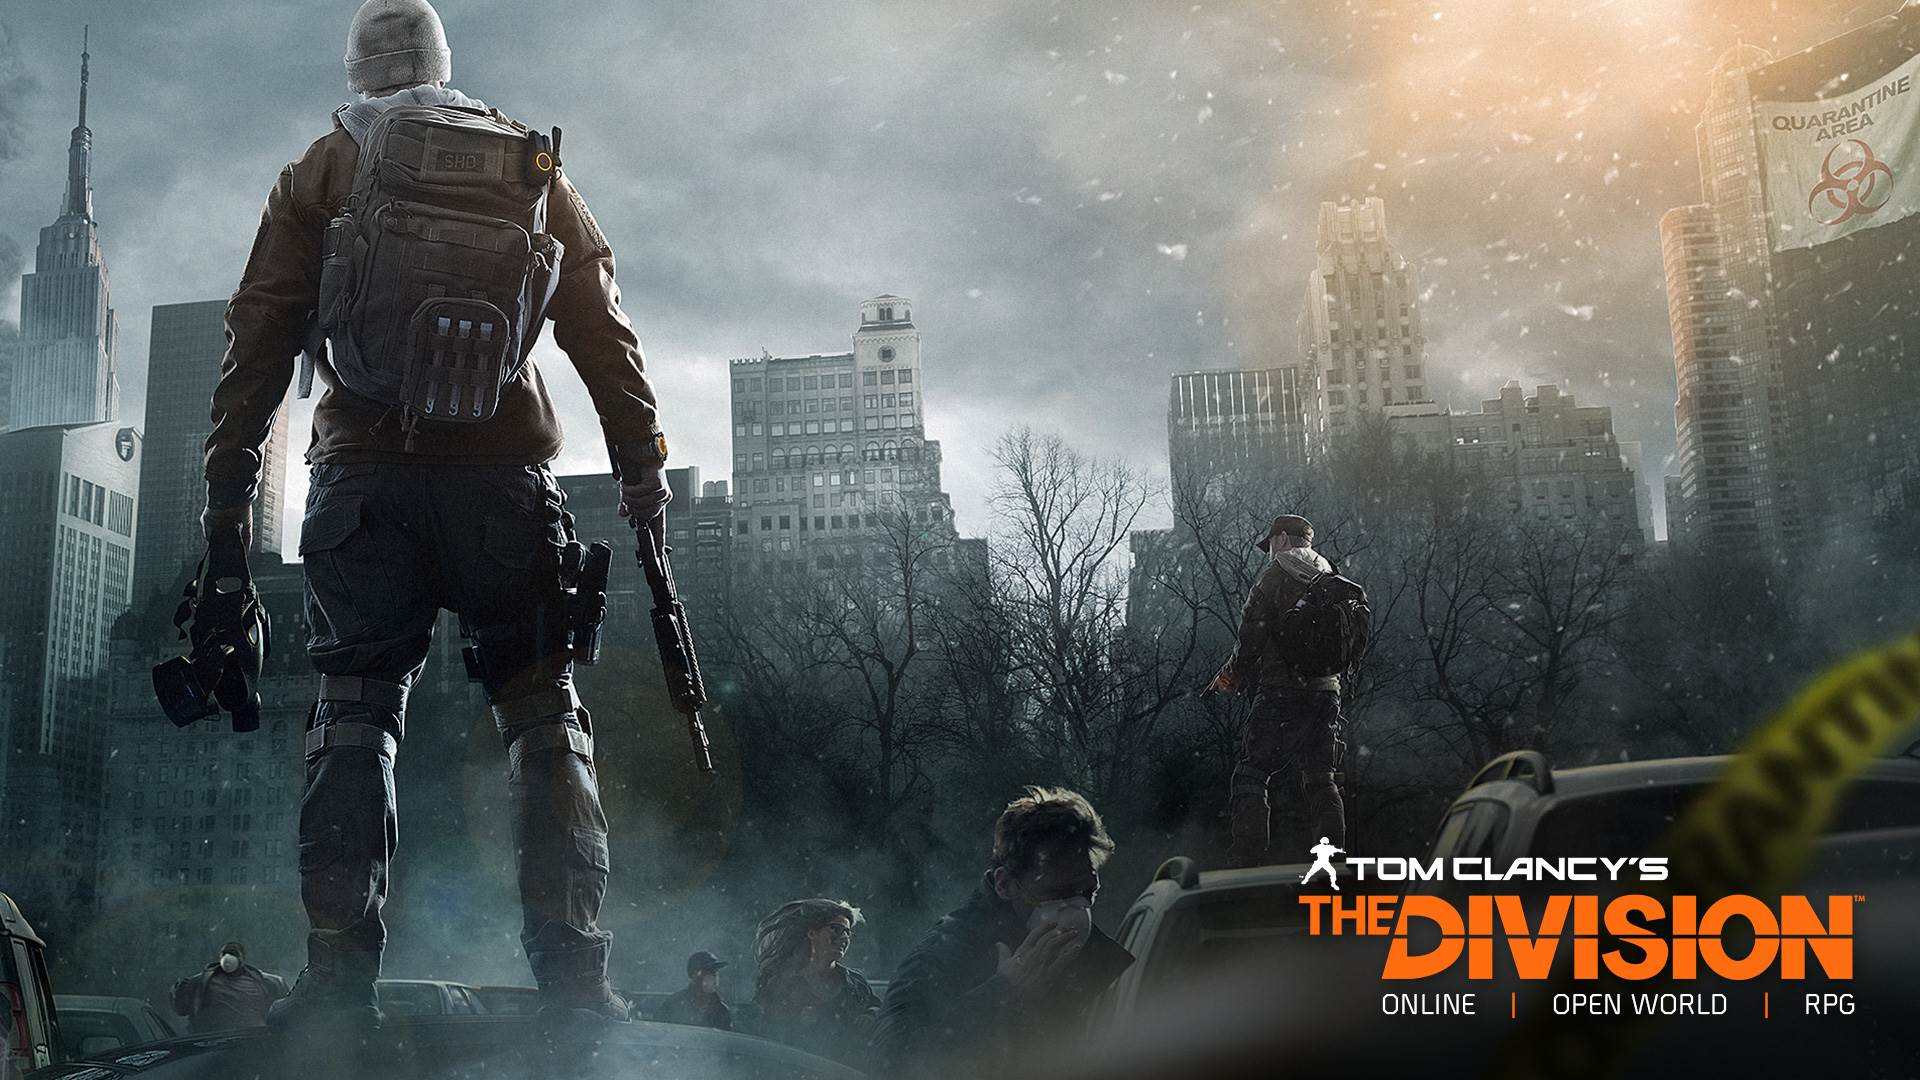 The Division Wallpaper In 1080p HD Gamingbolt Video Game